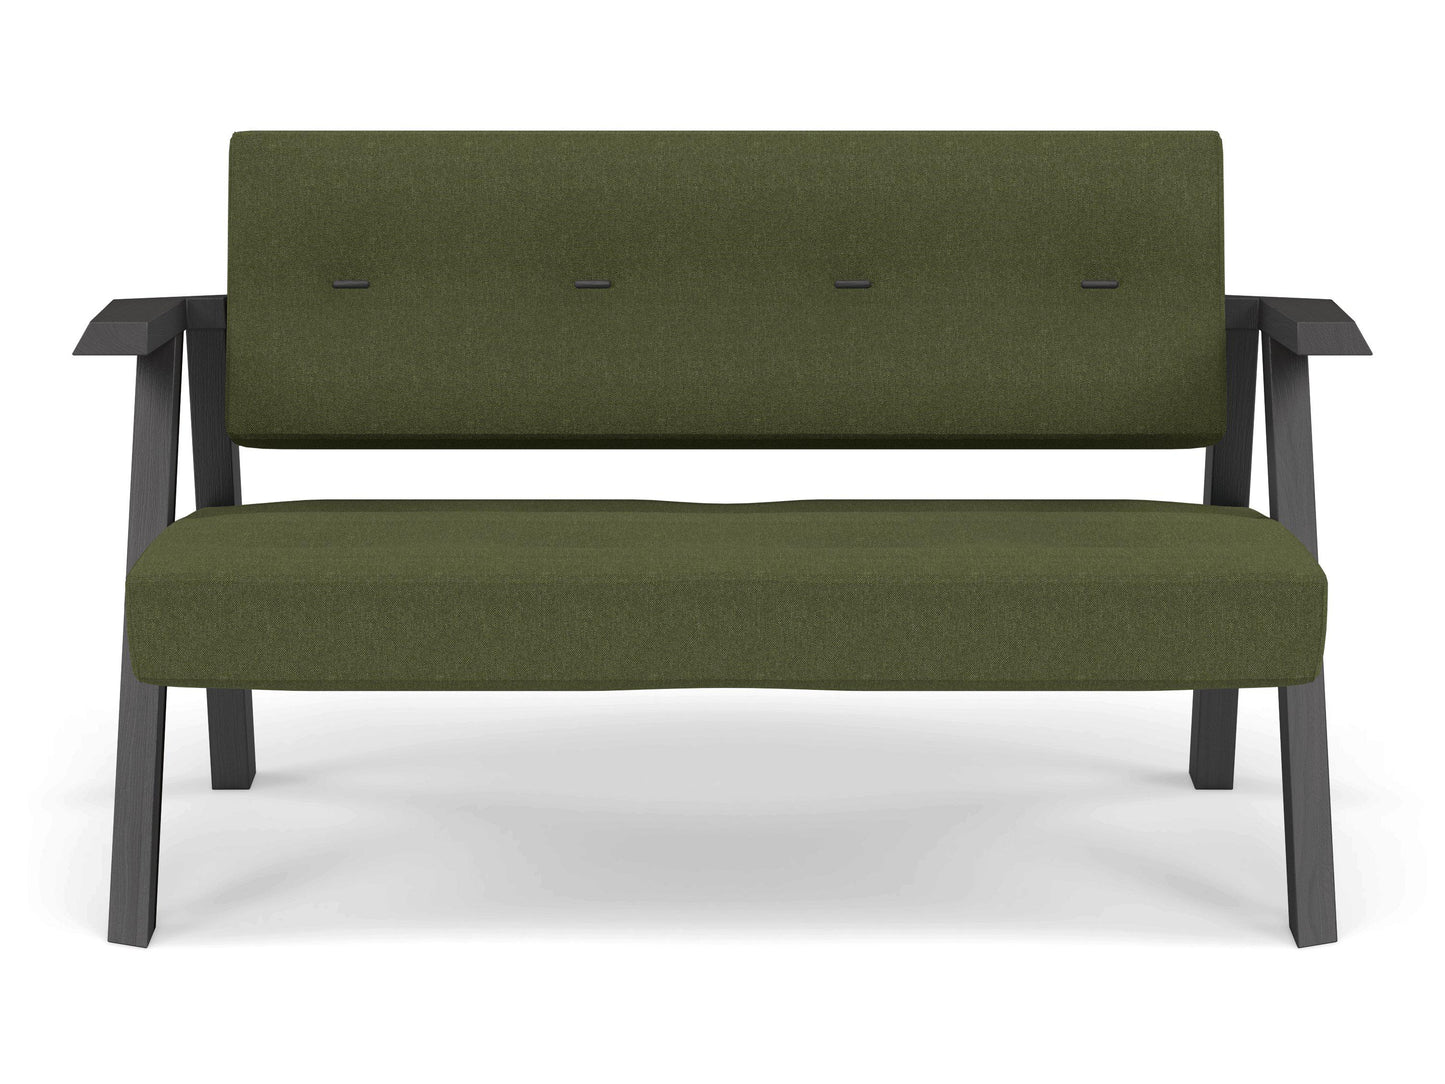 Classic Mid-century Design 2 Seater Sofa Armchair with Buttons in Seaweed Green Fabric-Wenge Oak-Distinct Designs (London) Ltd